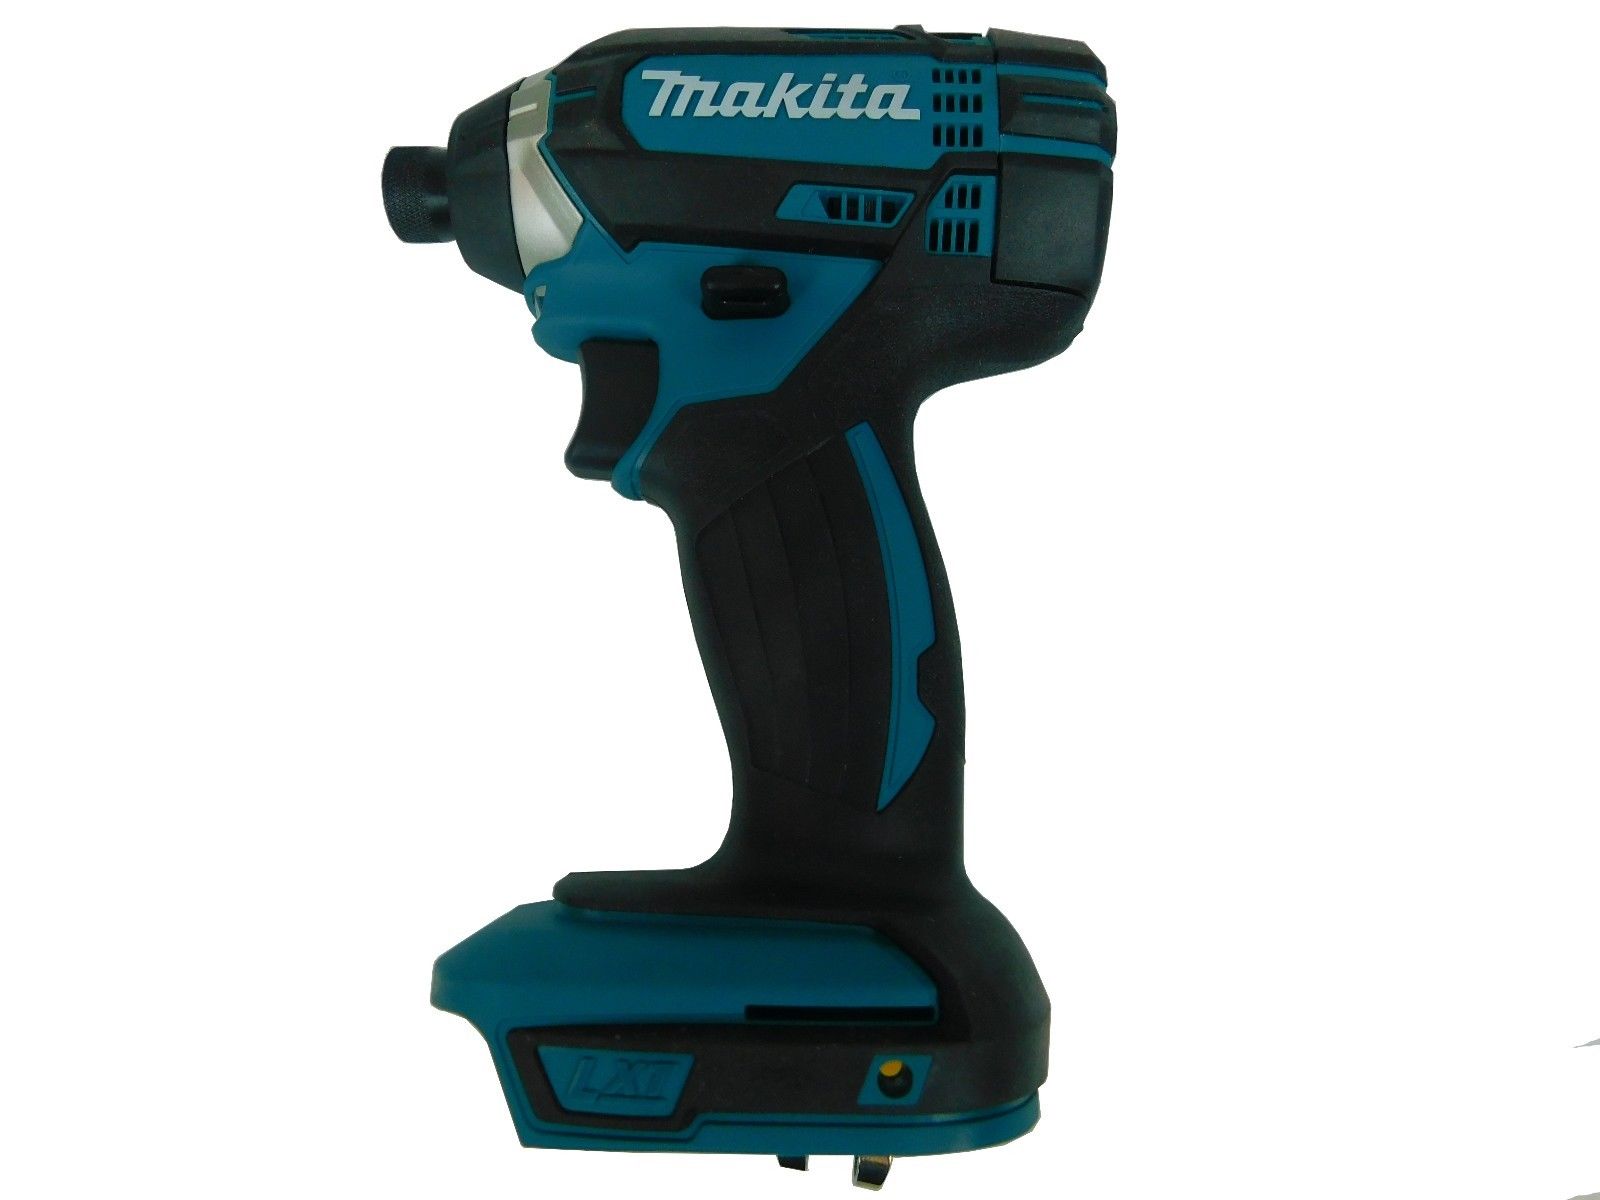 Makita XDT11Z-NBX 18V LXT Cordless Lithium-Ion 1/4-inch Hex Impact Driver (Tool Only) (CLONE)